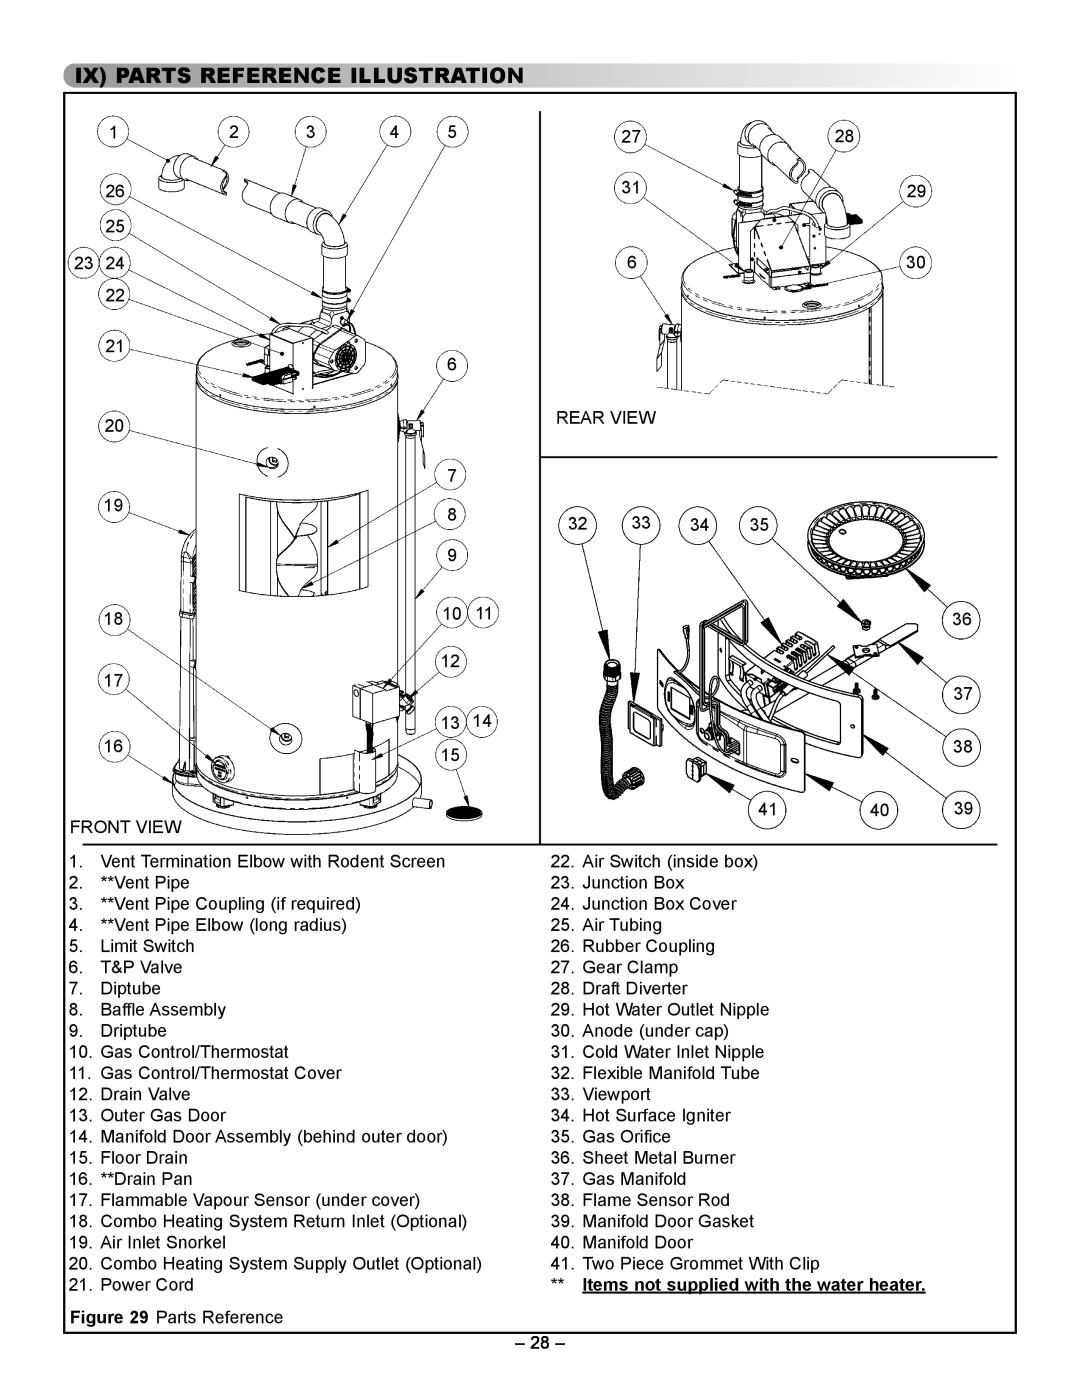 GSW 5065 manual Ix Parts Reference Illustration, Items not supplied with the water heater 